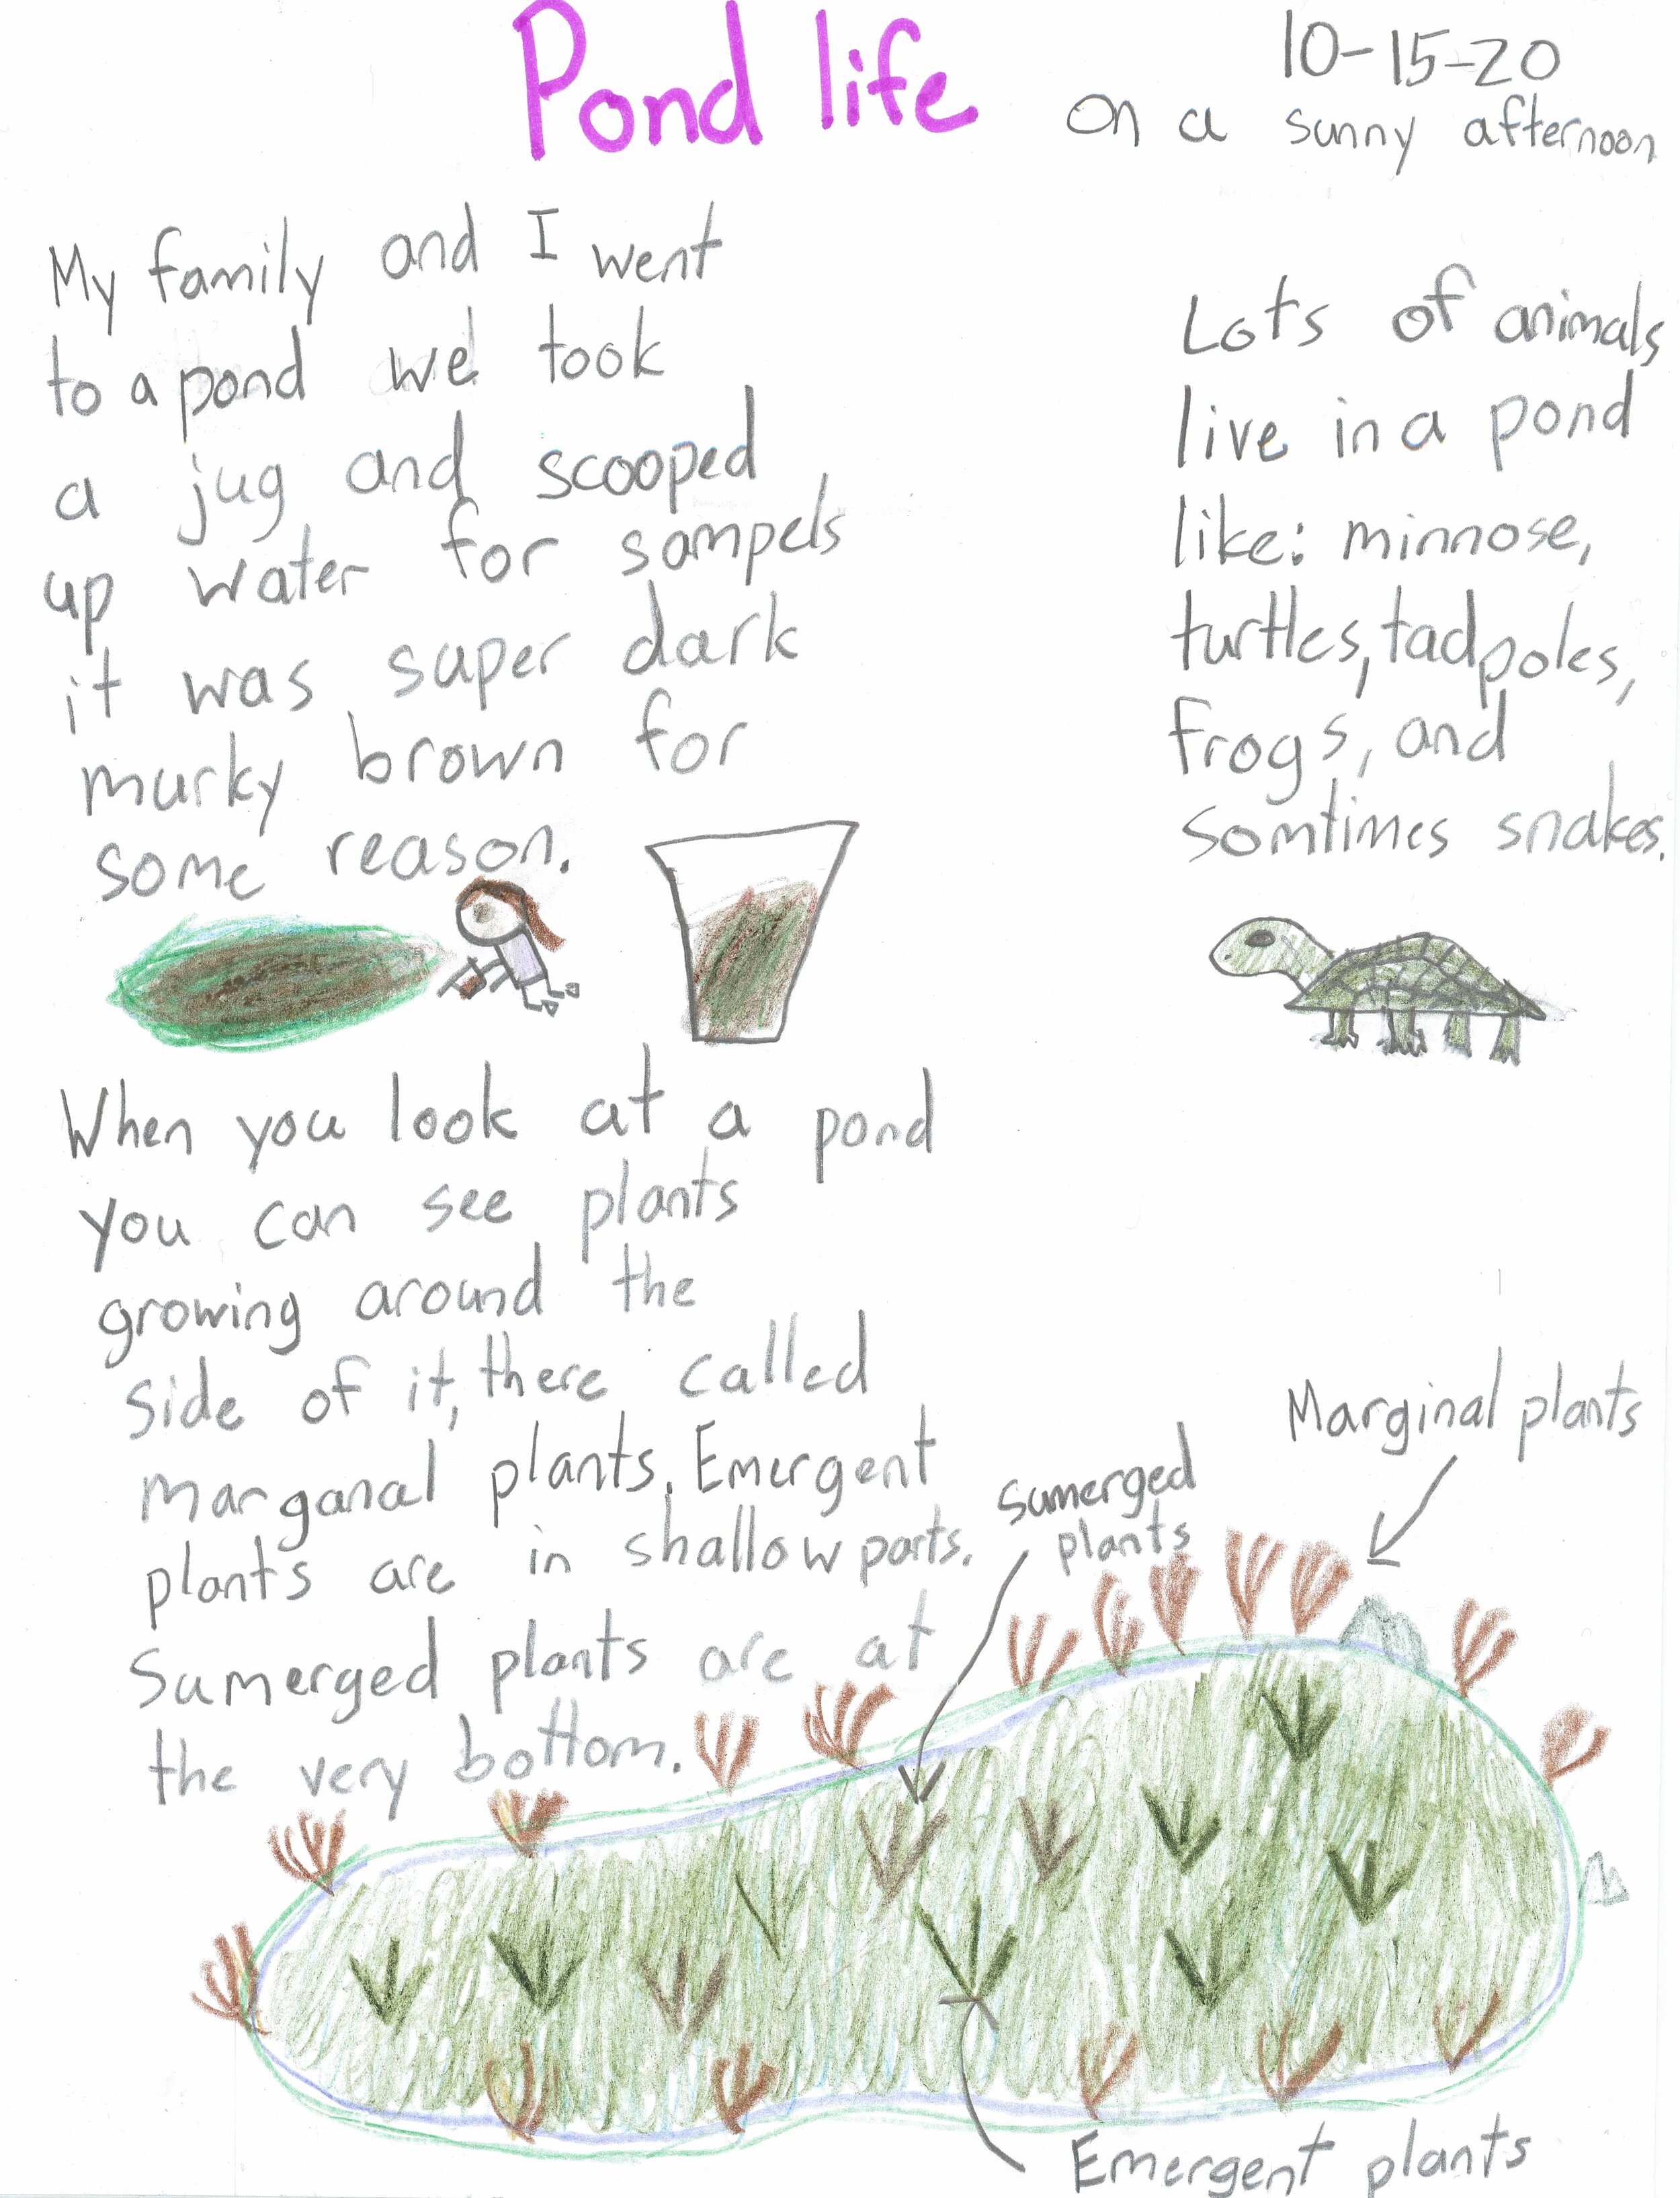 Pond Life by Charlotte Freestone - 3rd Place - Grades 3-5